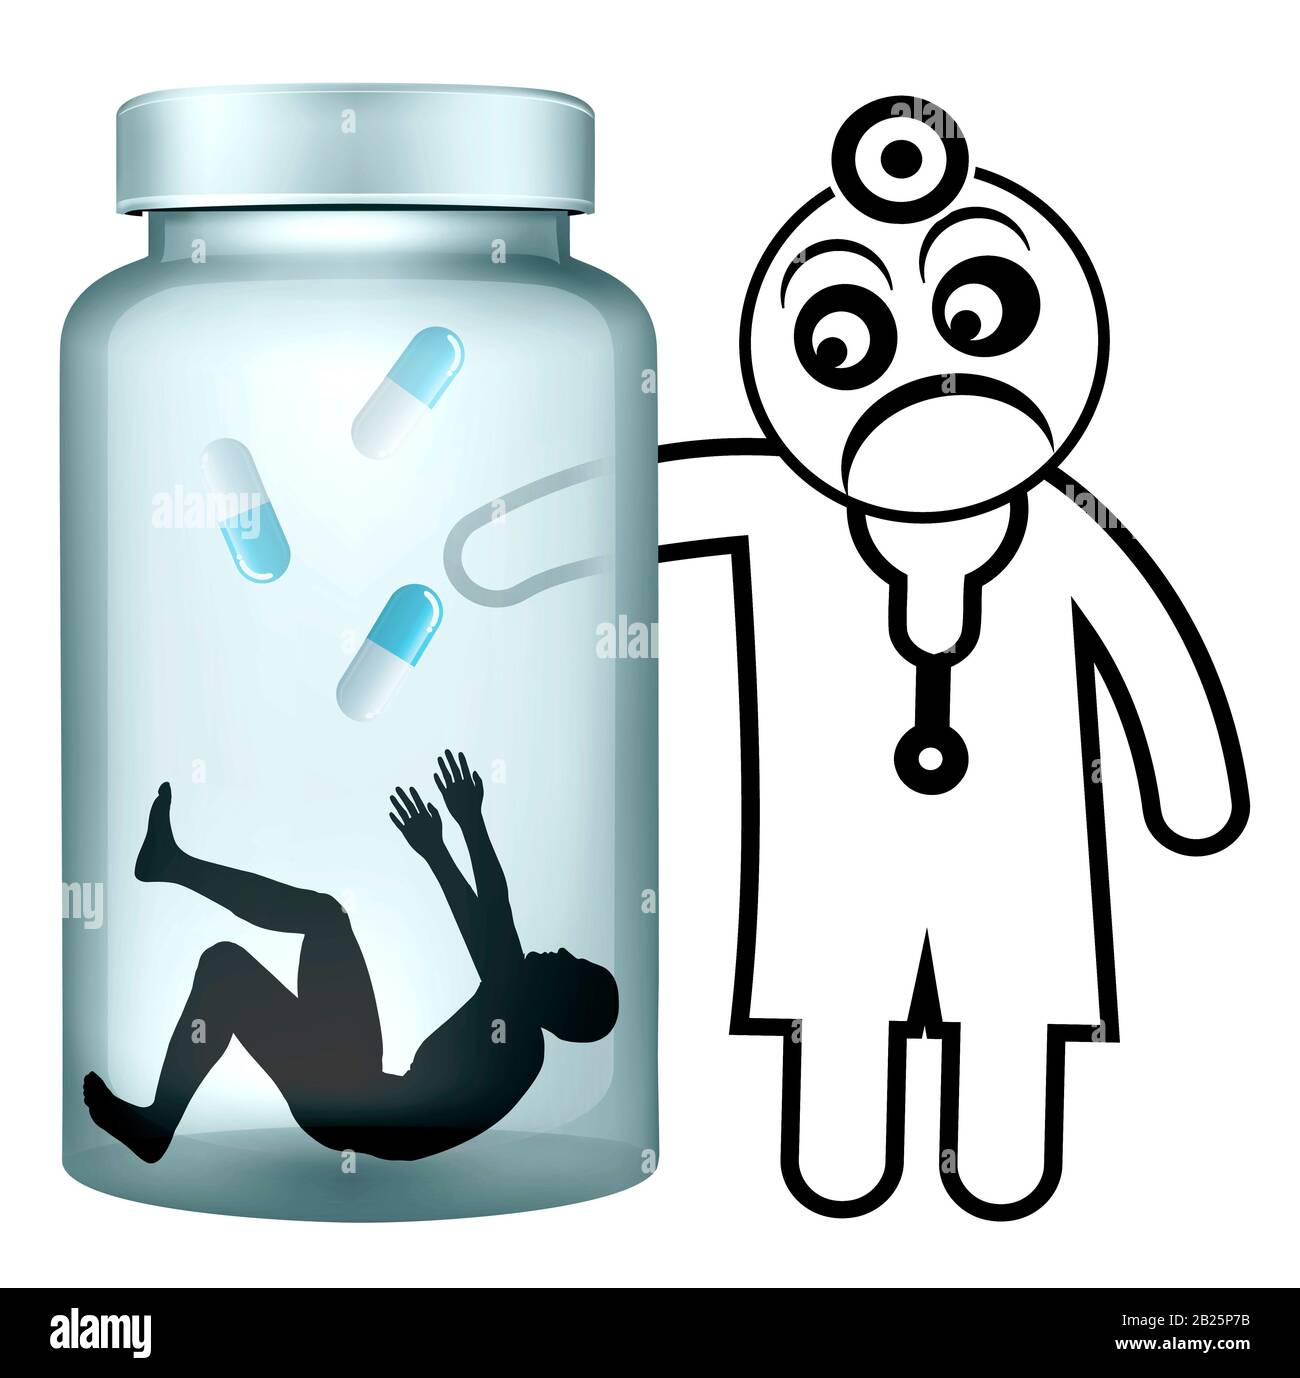 Medication like opioid and painkiller used by patient in a way not intended by the prescribing doctor. Stock Photo